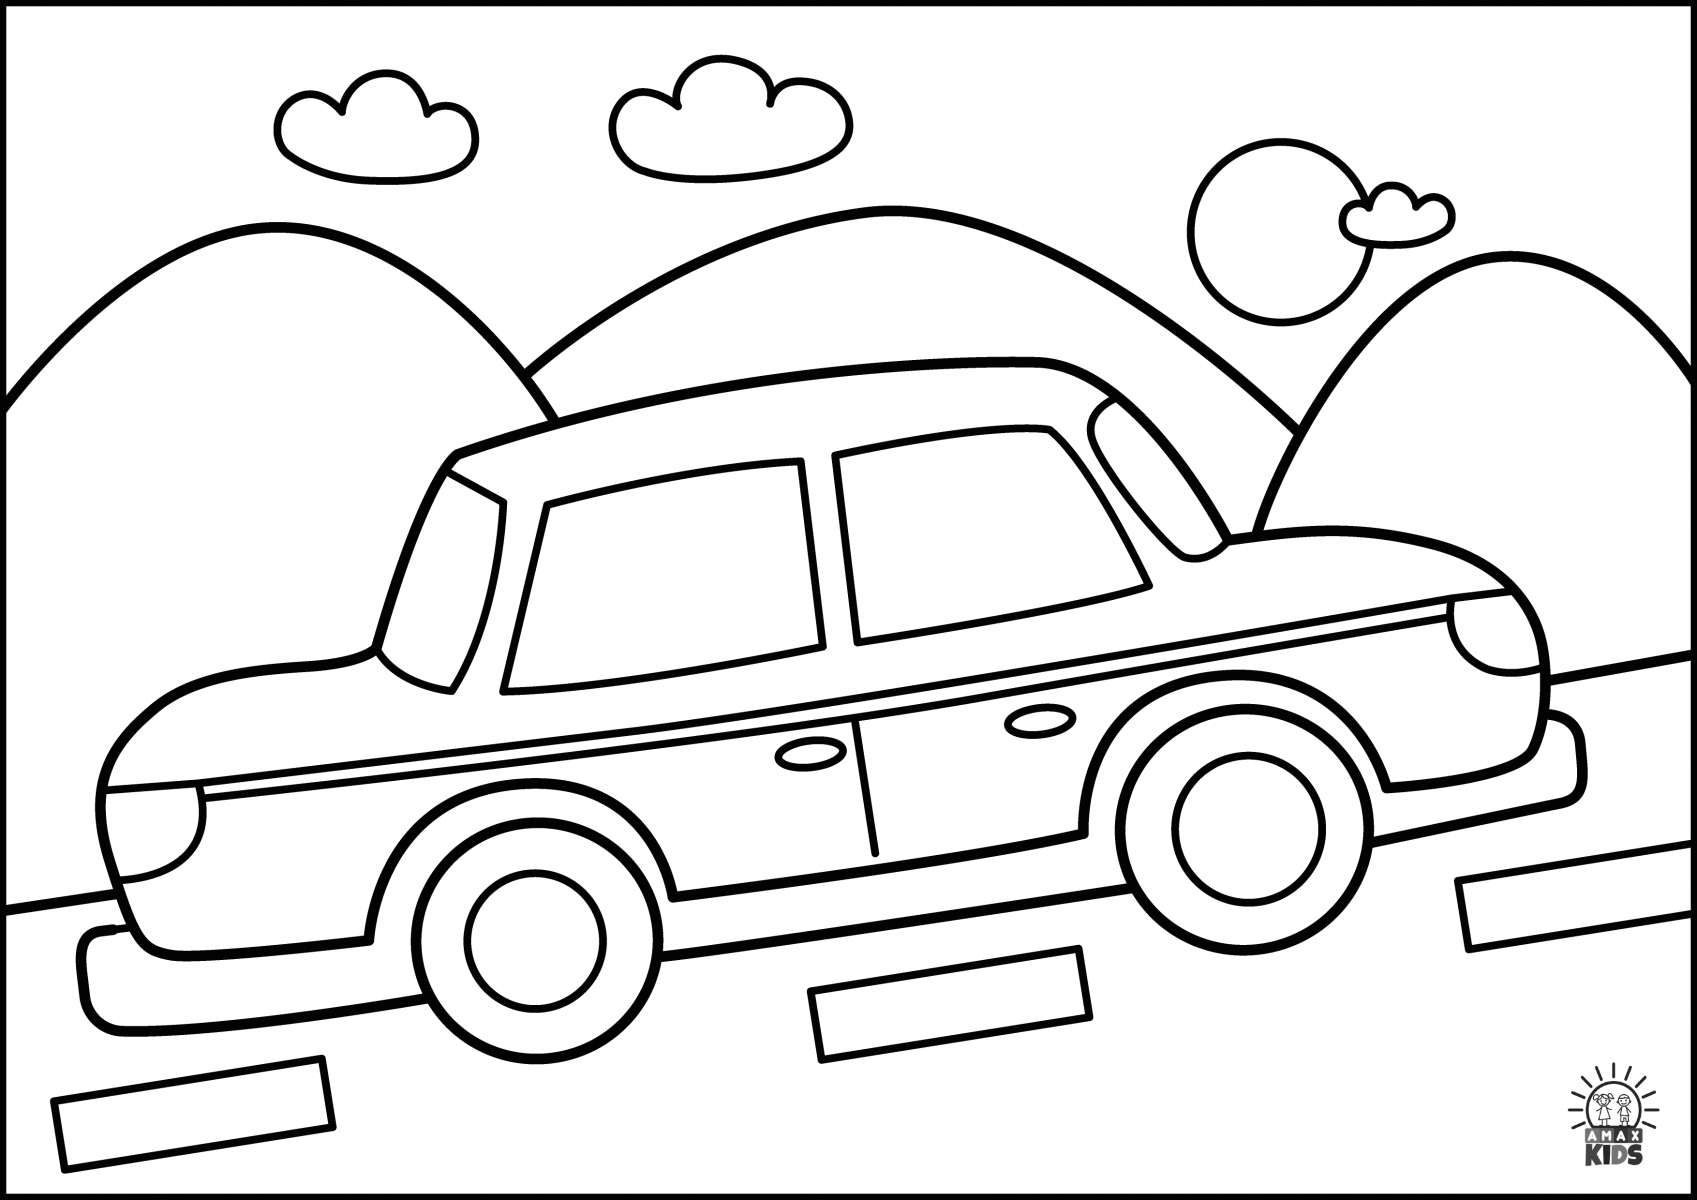 Coloring pages for kids – Transport | Amax Kids